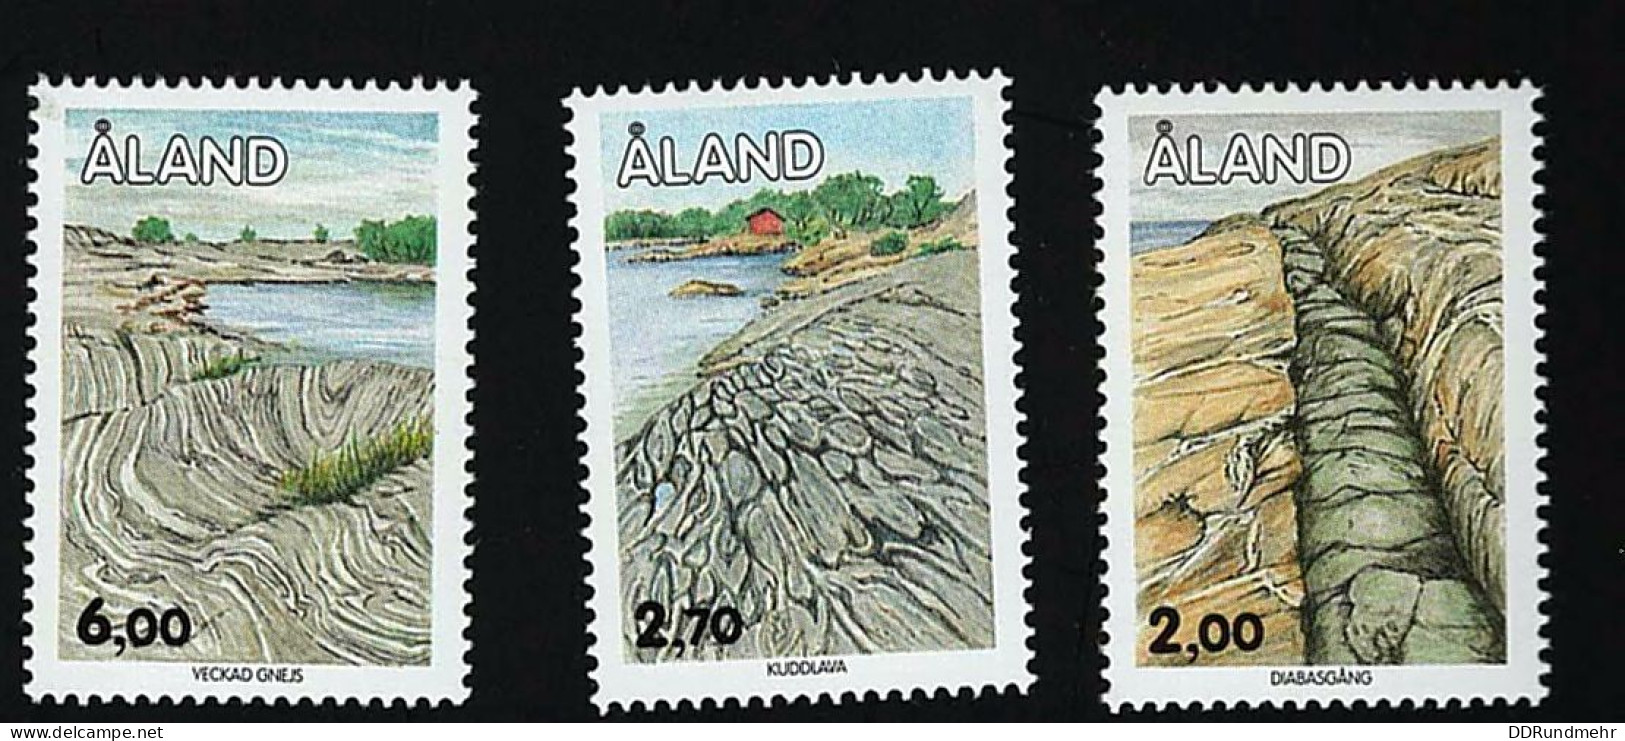 1993 Rock Formations Michel AX 75 - 77 Stamp Number AX 45 - 47 Yvert Et Tellier AX 75 - 77 Xx MNH - Aland